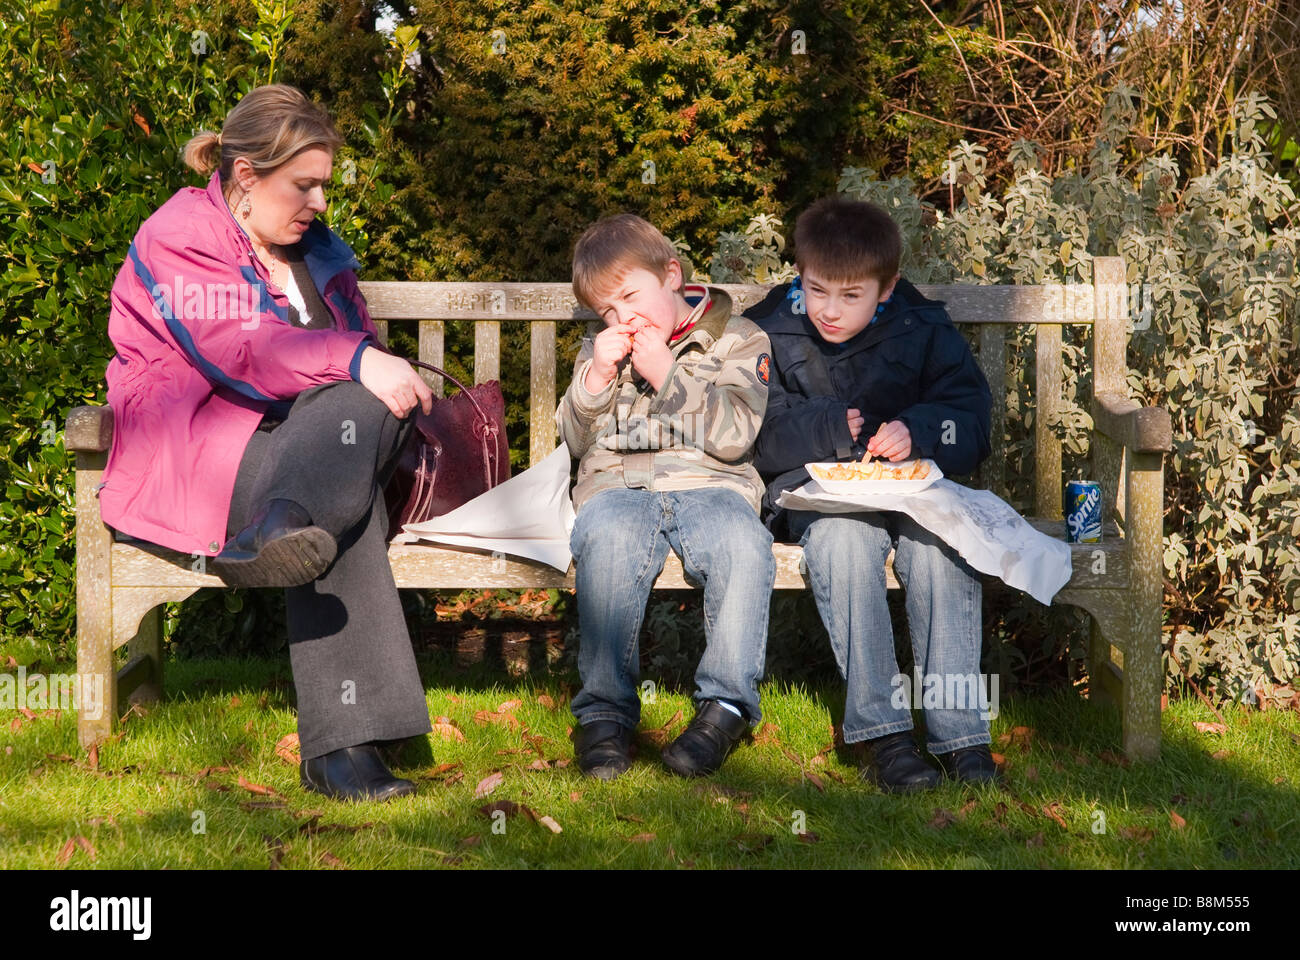 A family eating fish & chips on a bench outside in the Uk Stock Photo